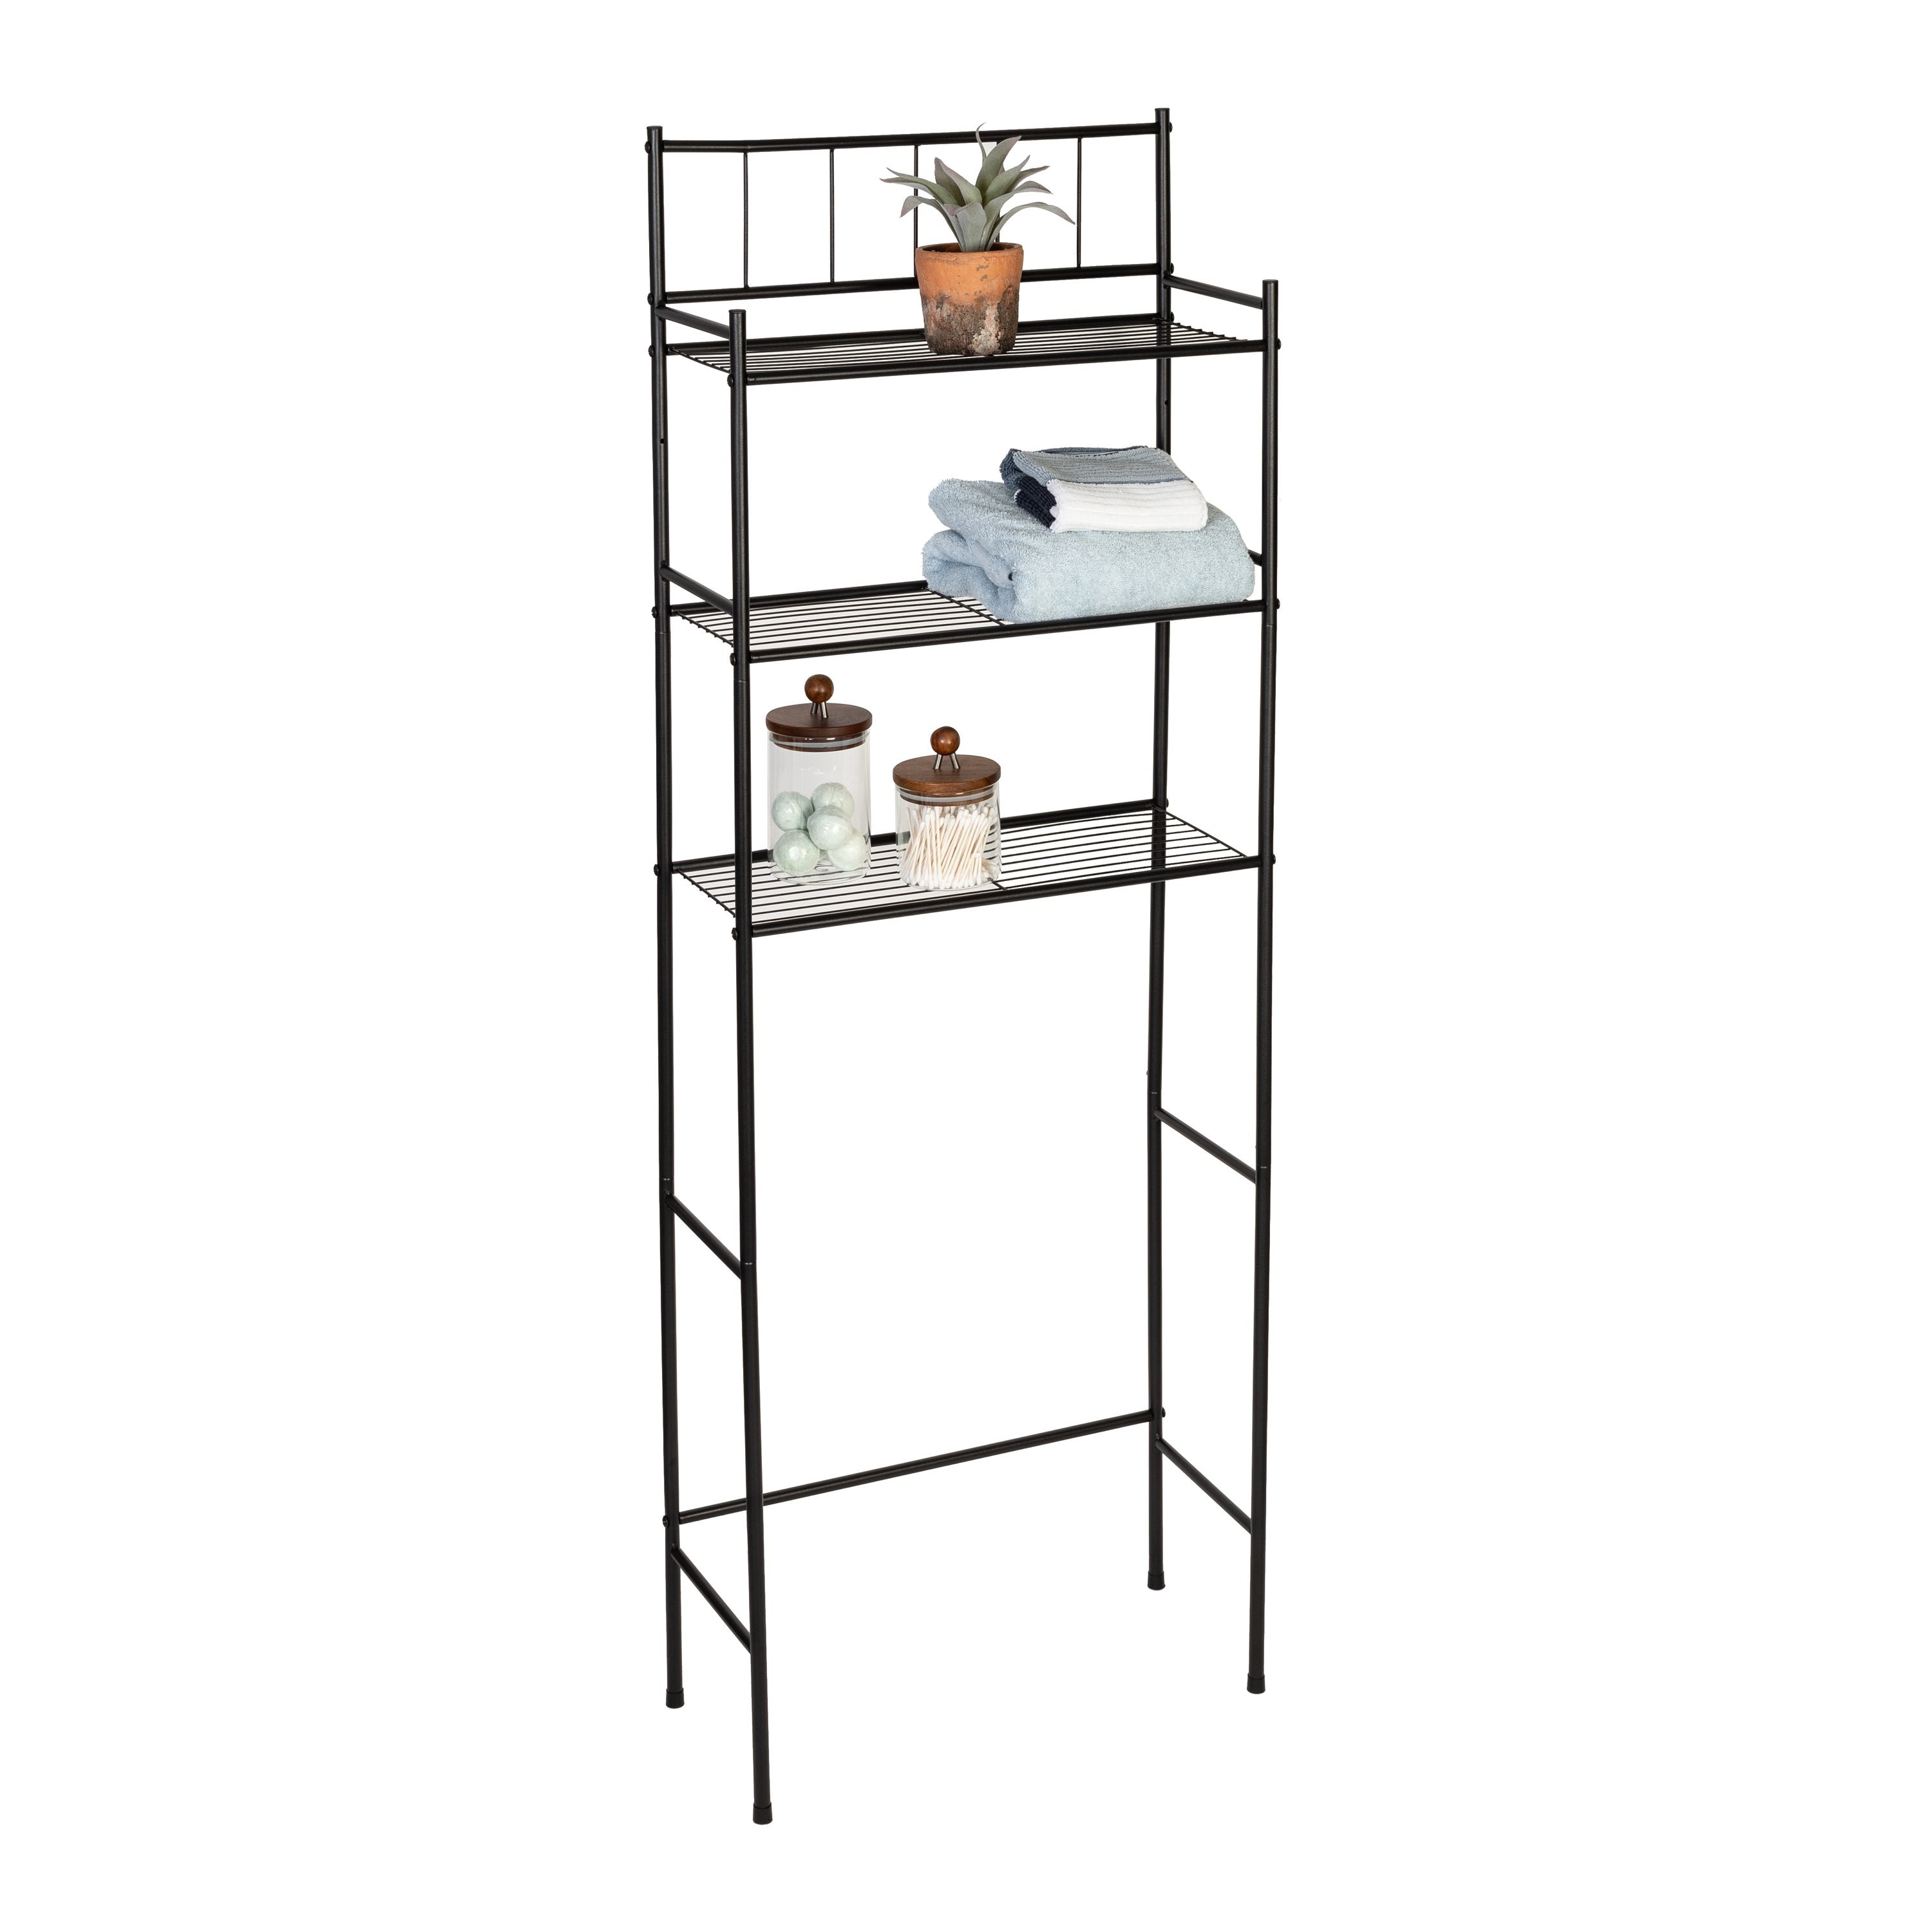 Over The Toilet Space Saver Shelving Unit Black